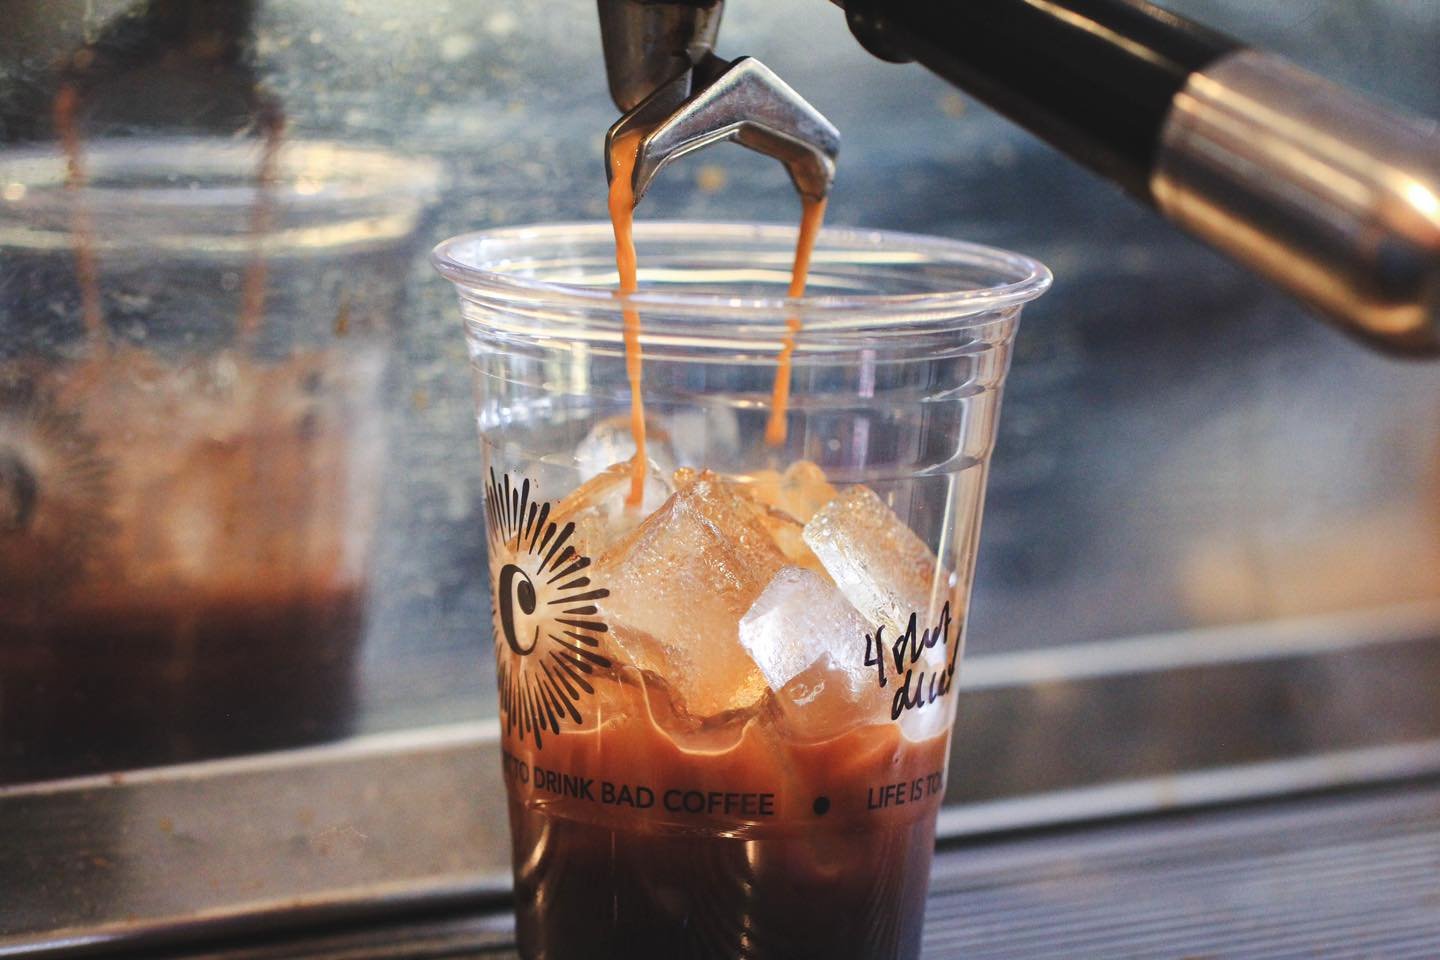 It&rsquo;s almost Friday! Stop by on this hot day and enjoy a refreshing iced coffee with us! 

On brew we have Sexy Seven for our dark roast and Papua New Guinea City for our light to medium roast!